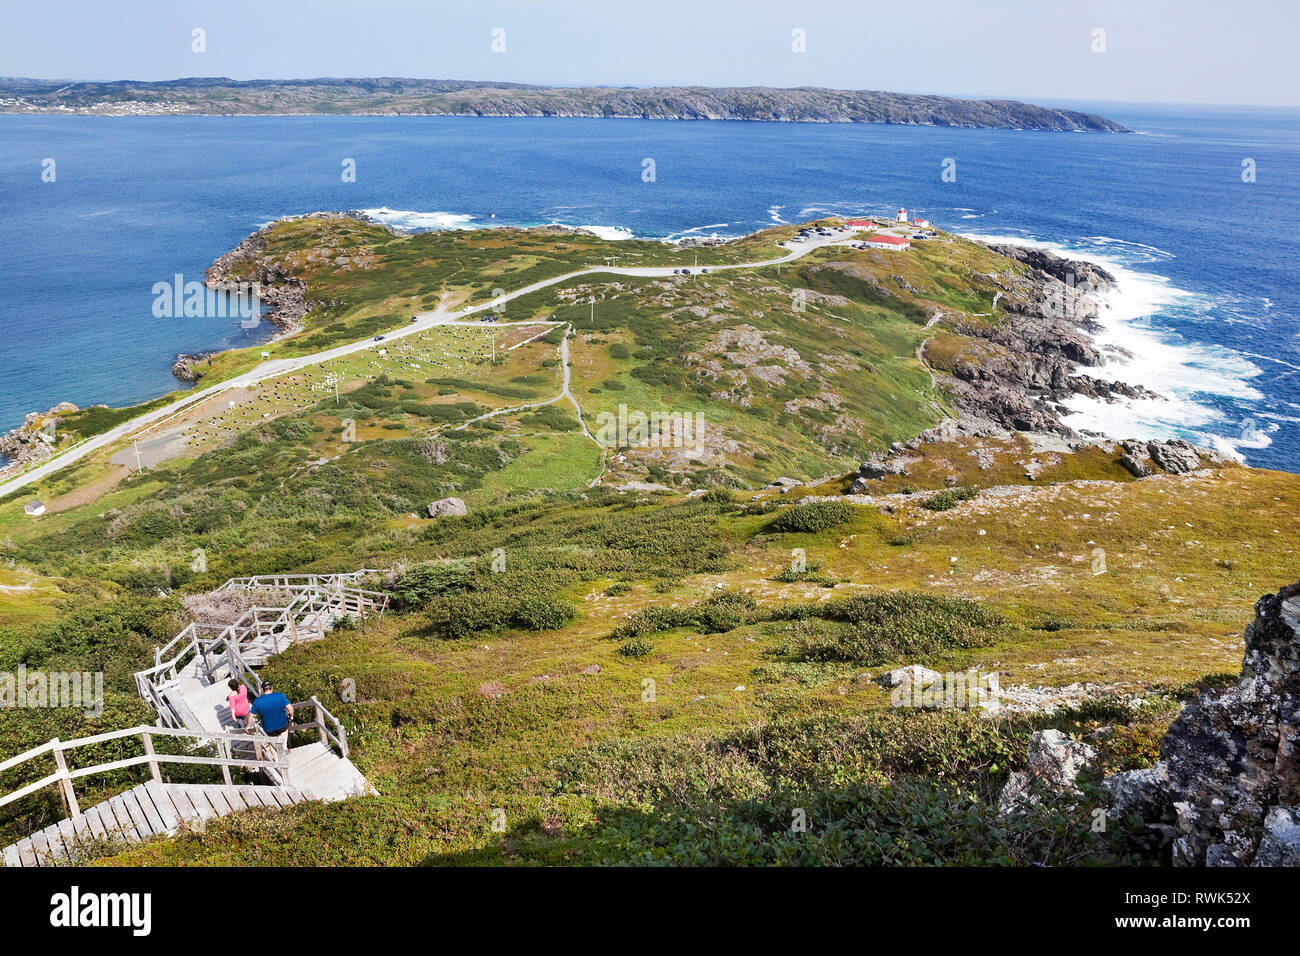 Fishing Point, also known as Fox Point, marks the south entrance to St.  Anthony Harbour in St. Anthony, Newfoundland, Canada. Photo taken from the  top of Daredevil Hill Stock Photo - Alamy